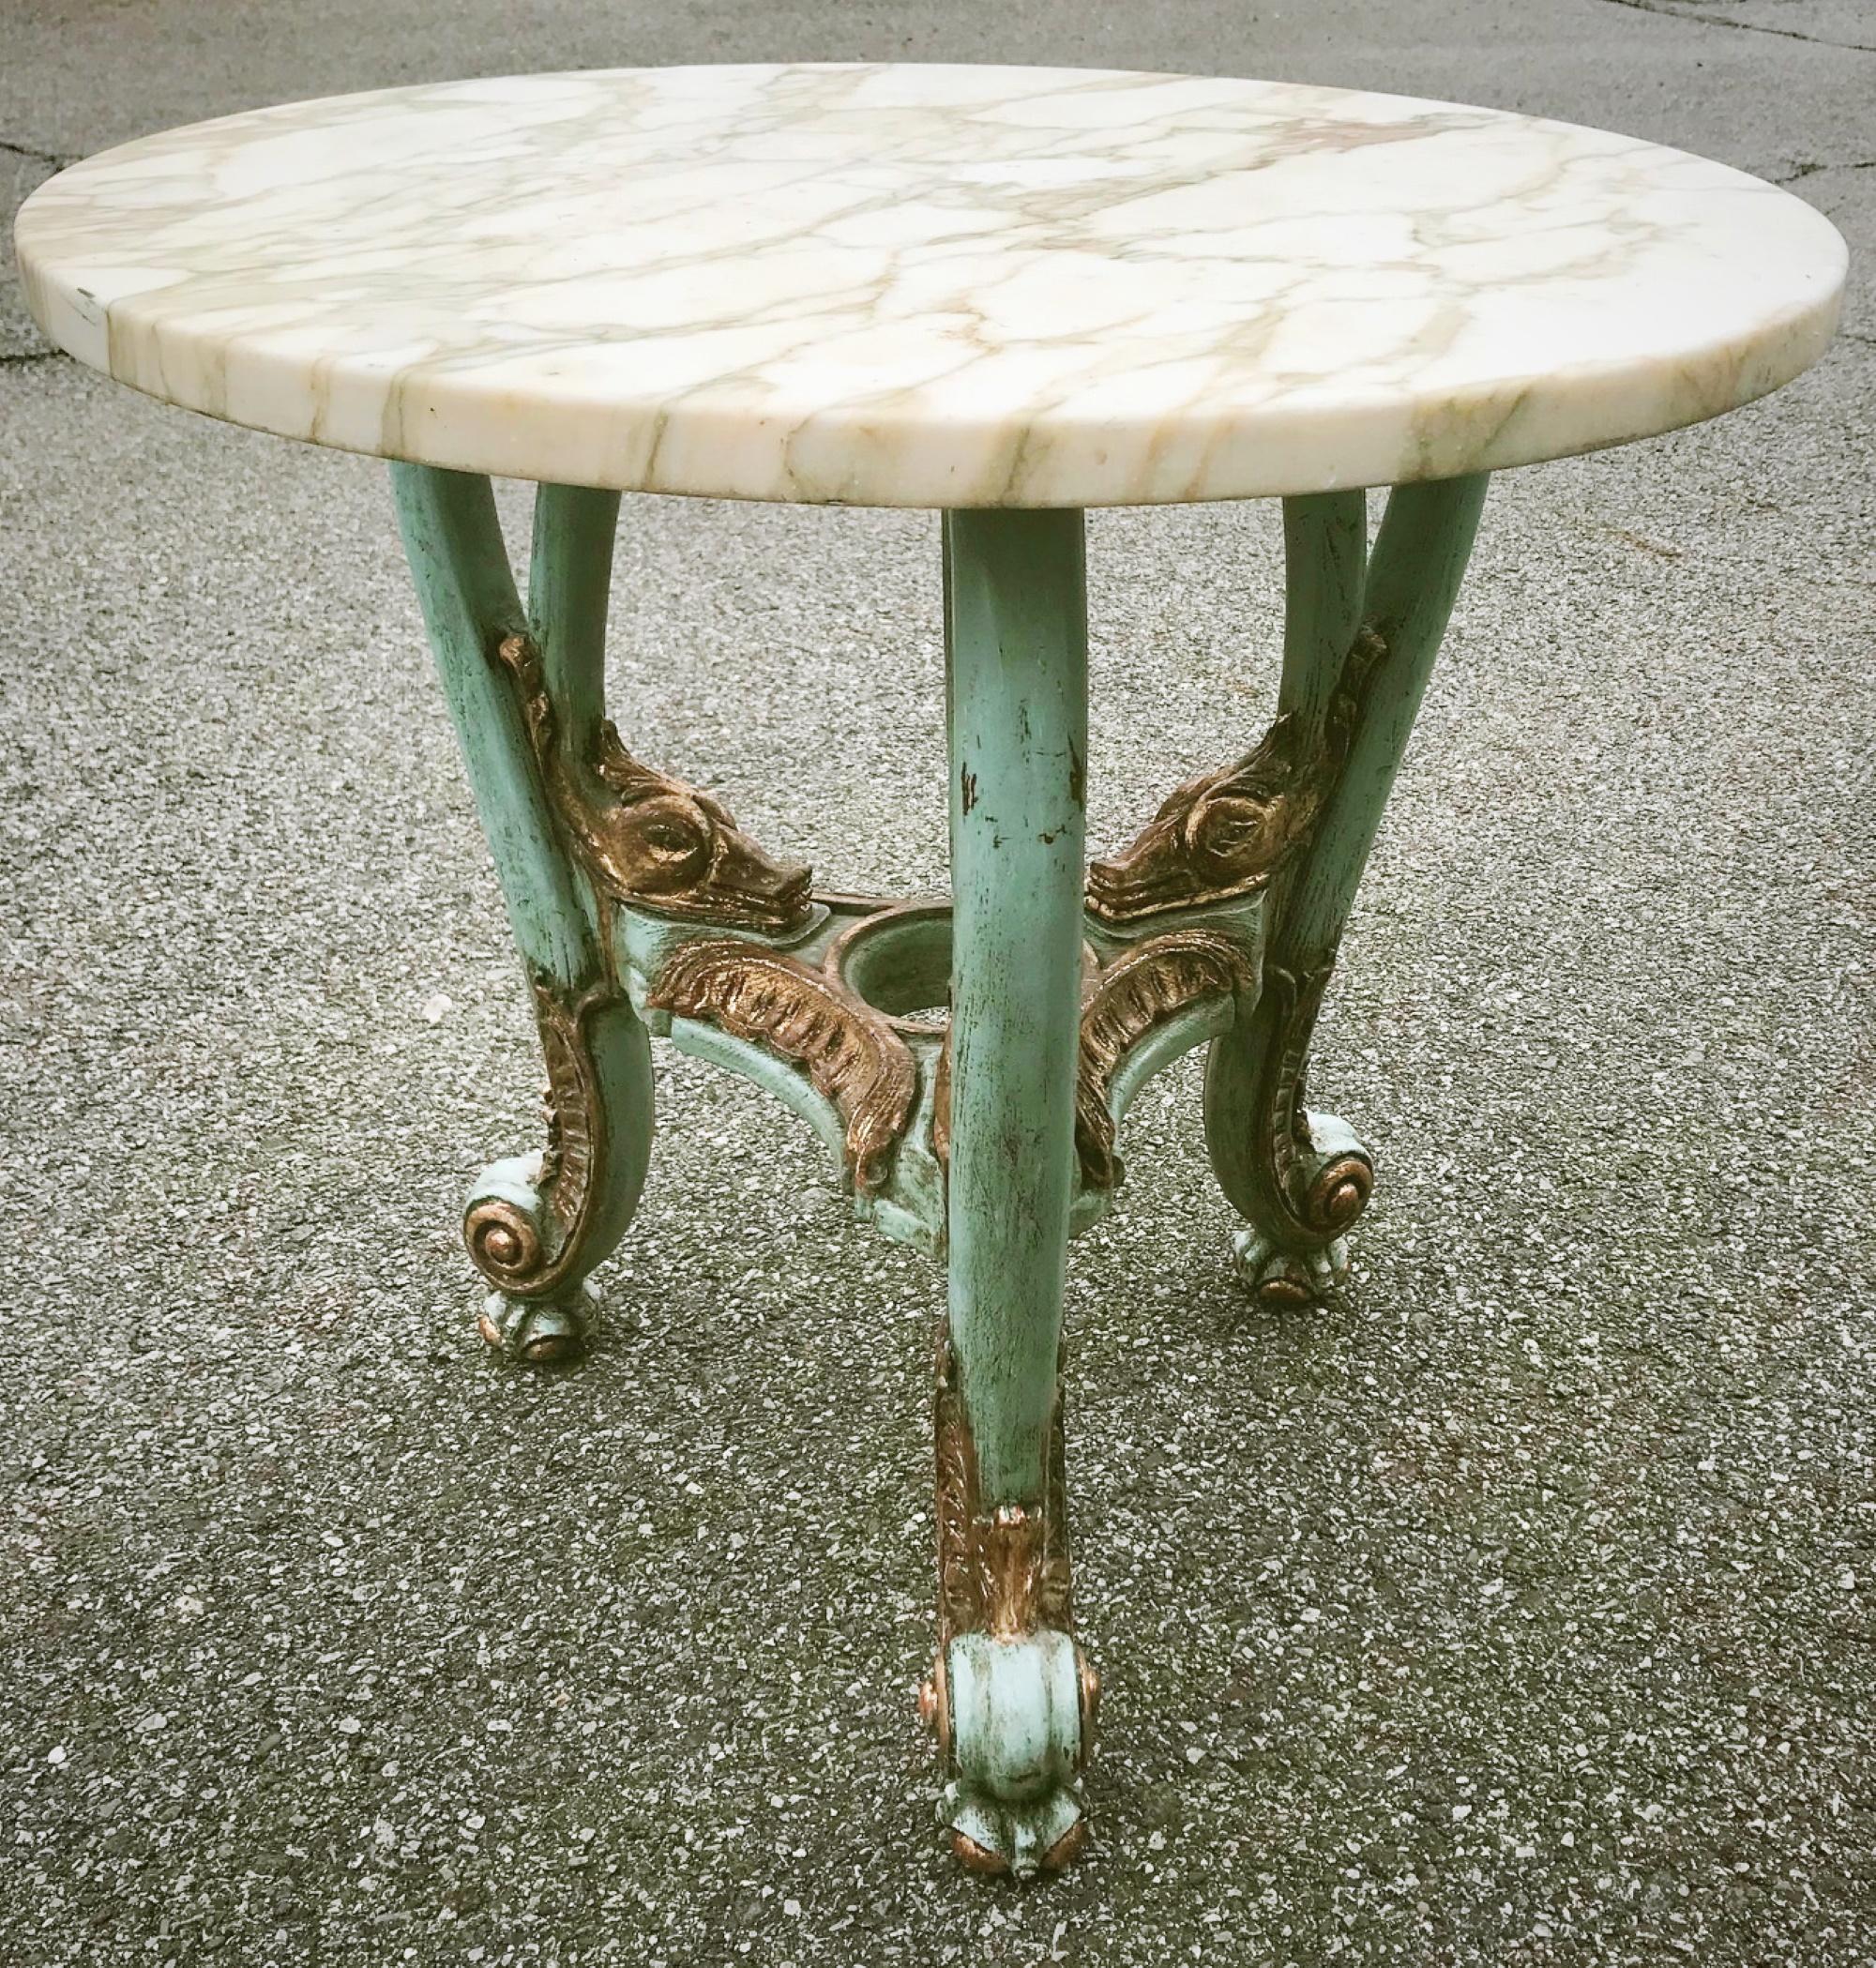 This round table is constructed in carved and polychrome wood. It has a marble top in circular shape. Beautiful carvings of rocaille, swan heads and claw feet are emphasized with gold gilding. The center under tier has a round opening, probably for